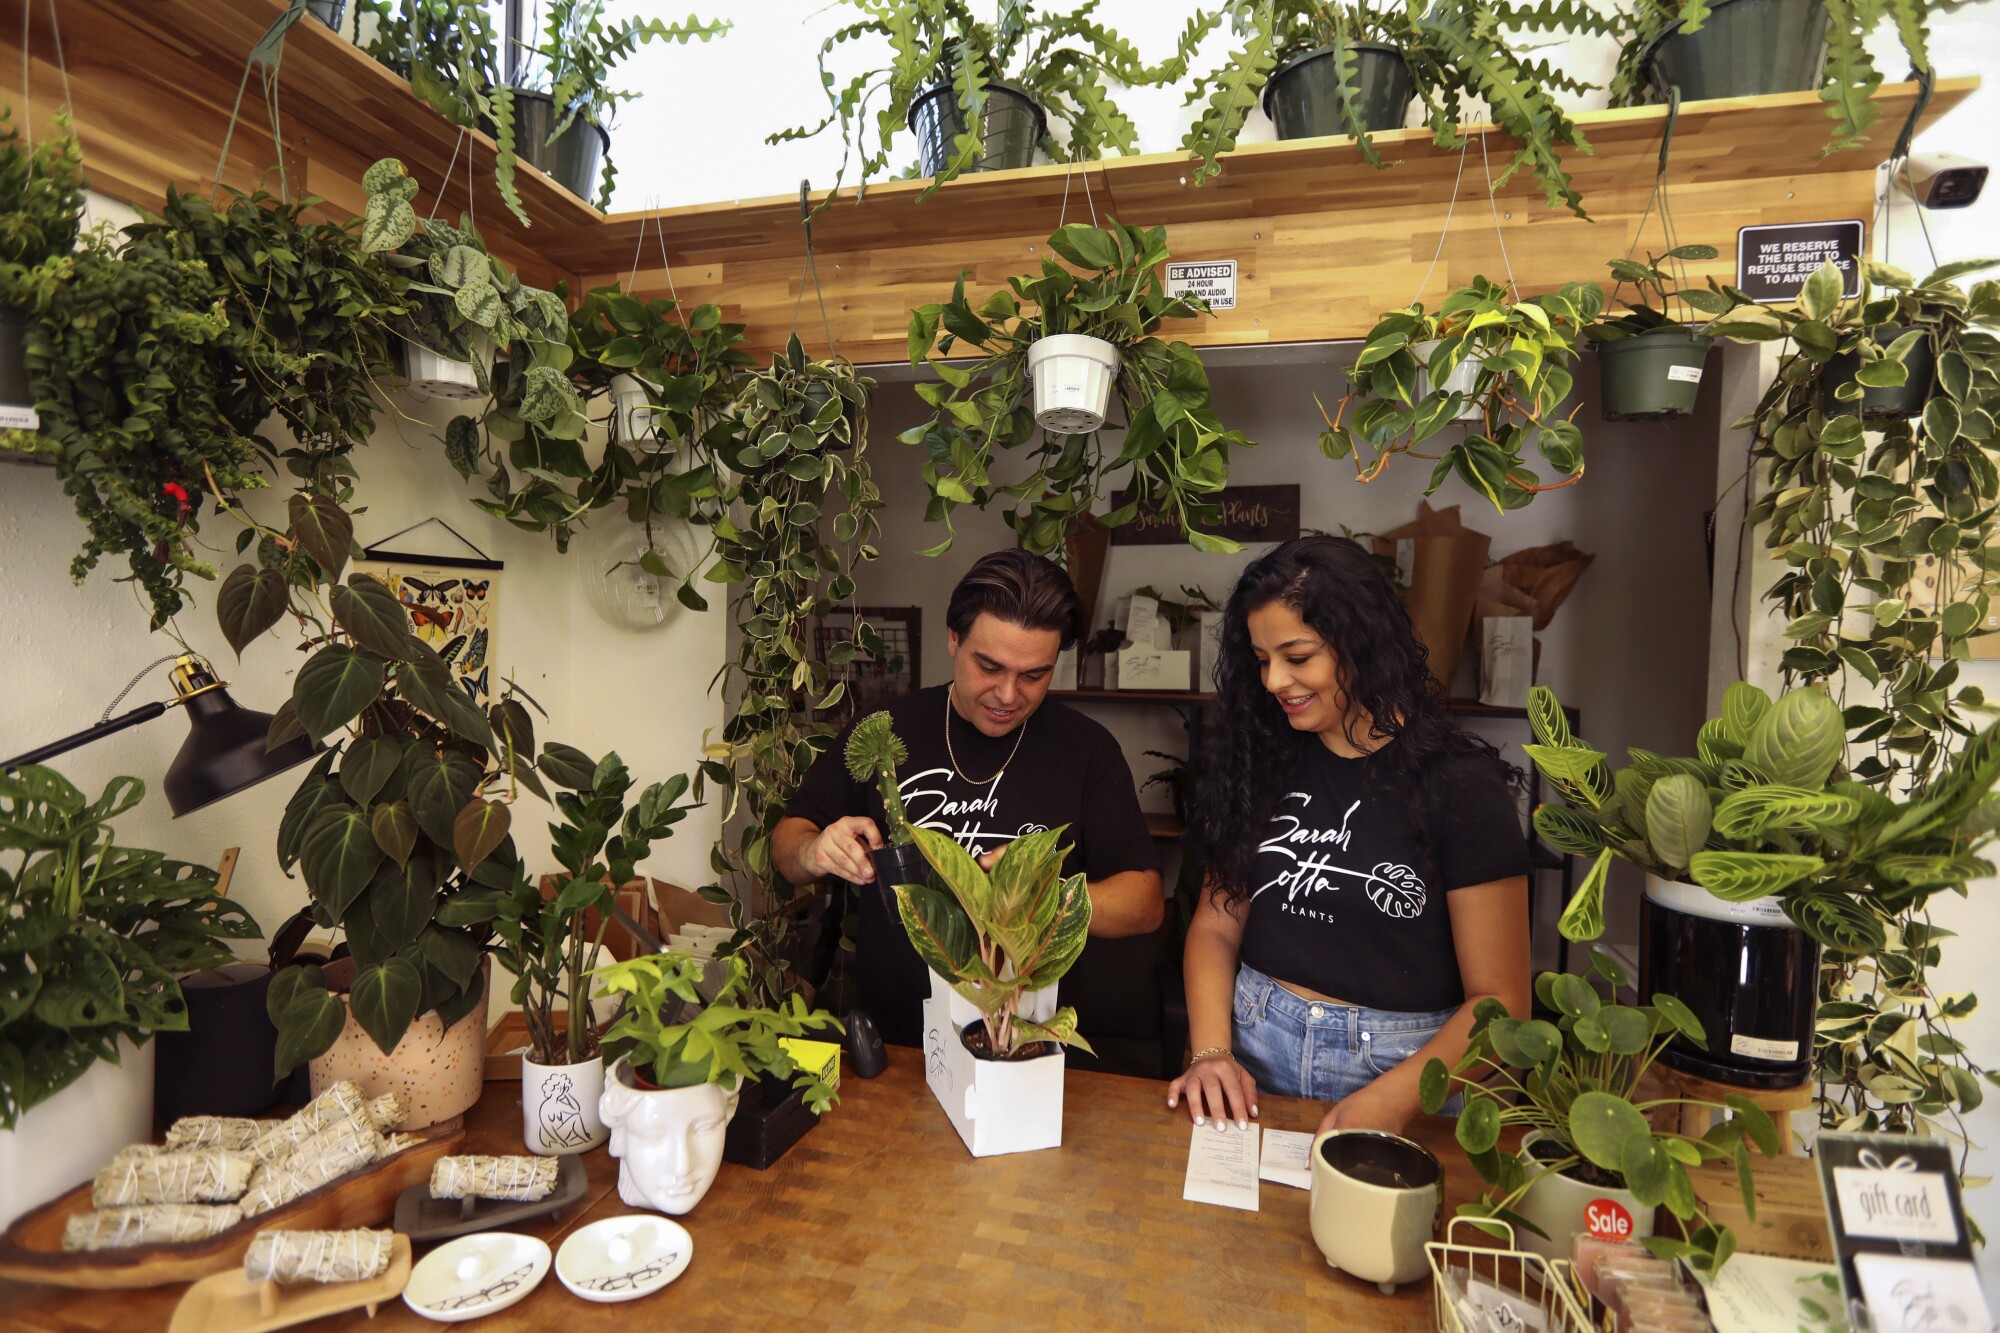 Sarah and Tadeh Bazik stand behind the counter of their store, surrounded by plants.